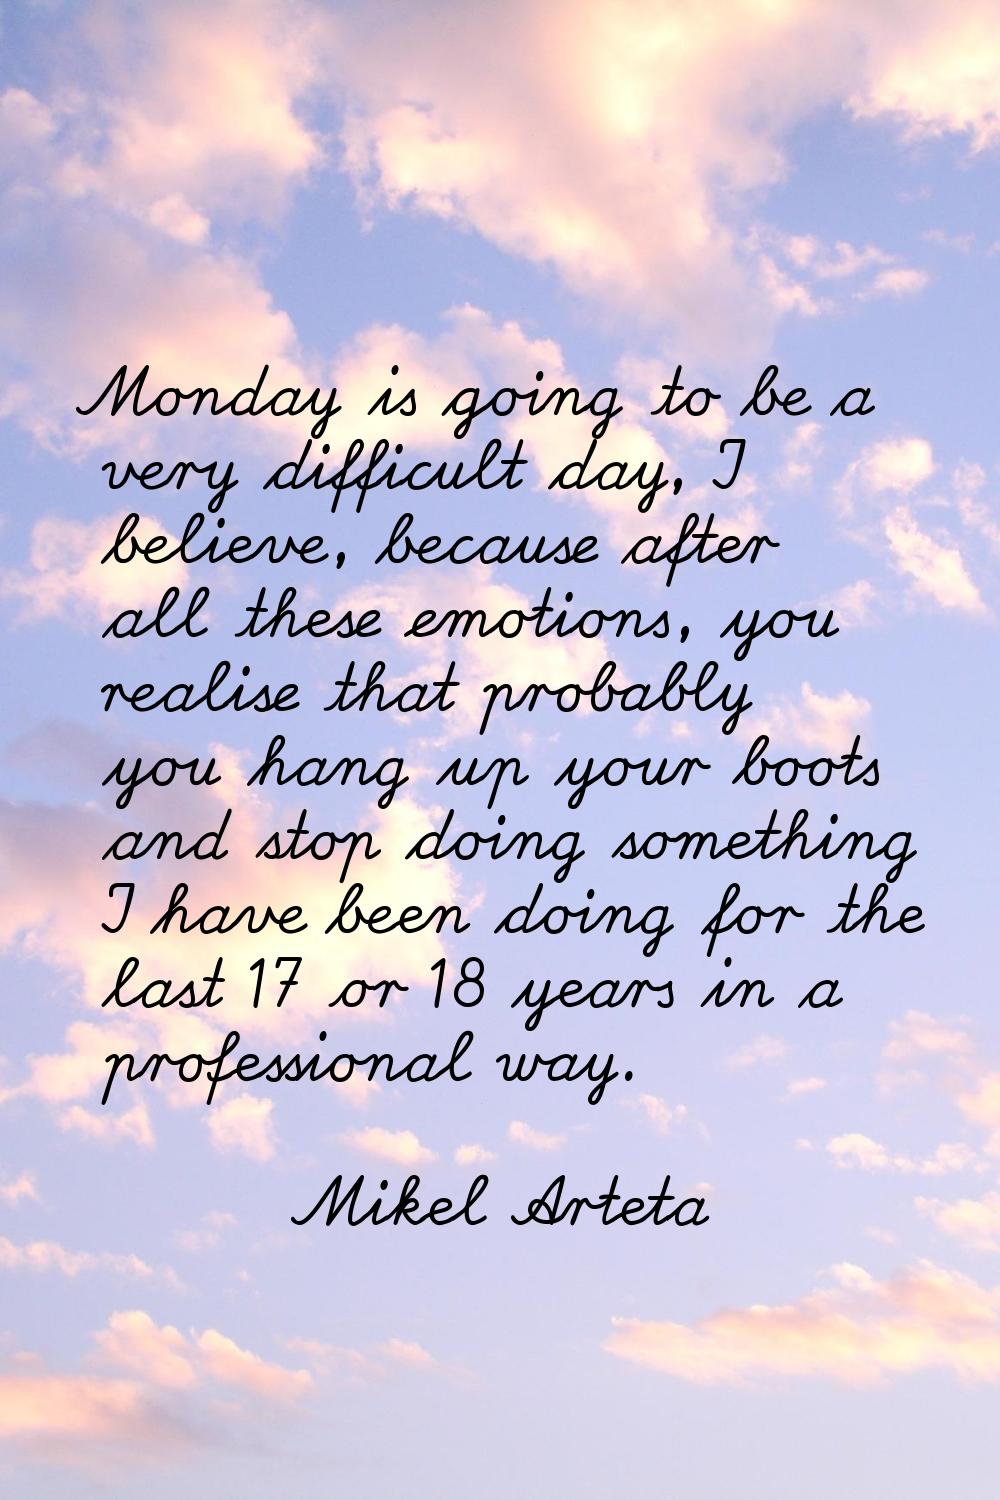 Monday is going to be a very difficult day, I believe, because after all these emotions, you realis